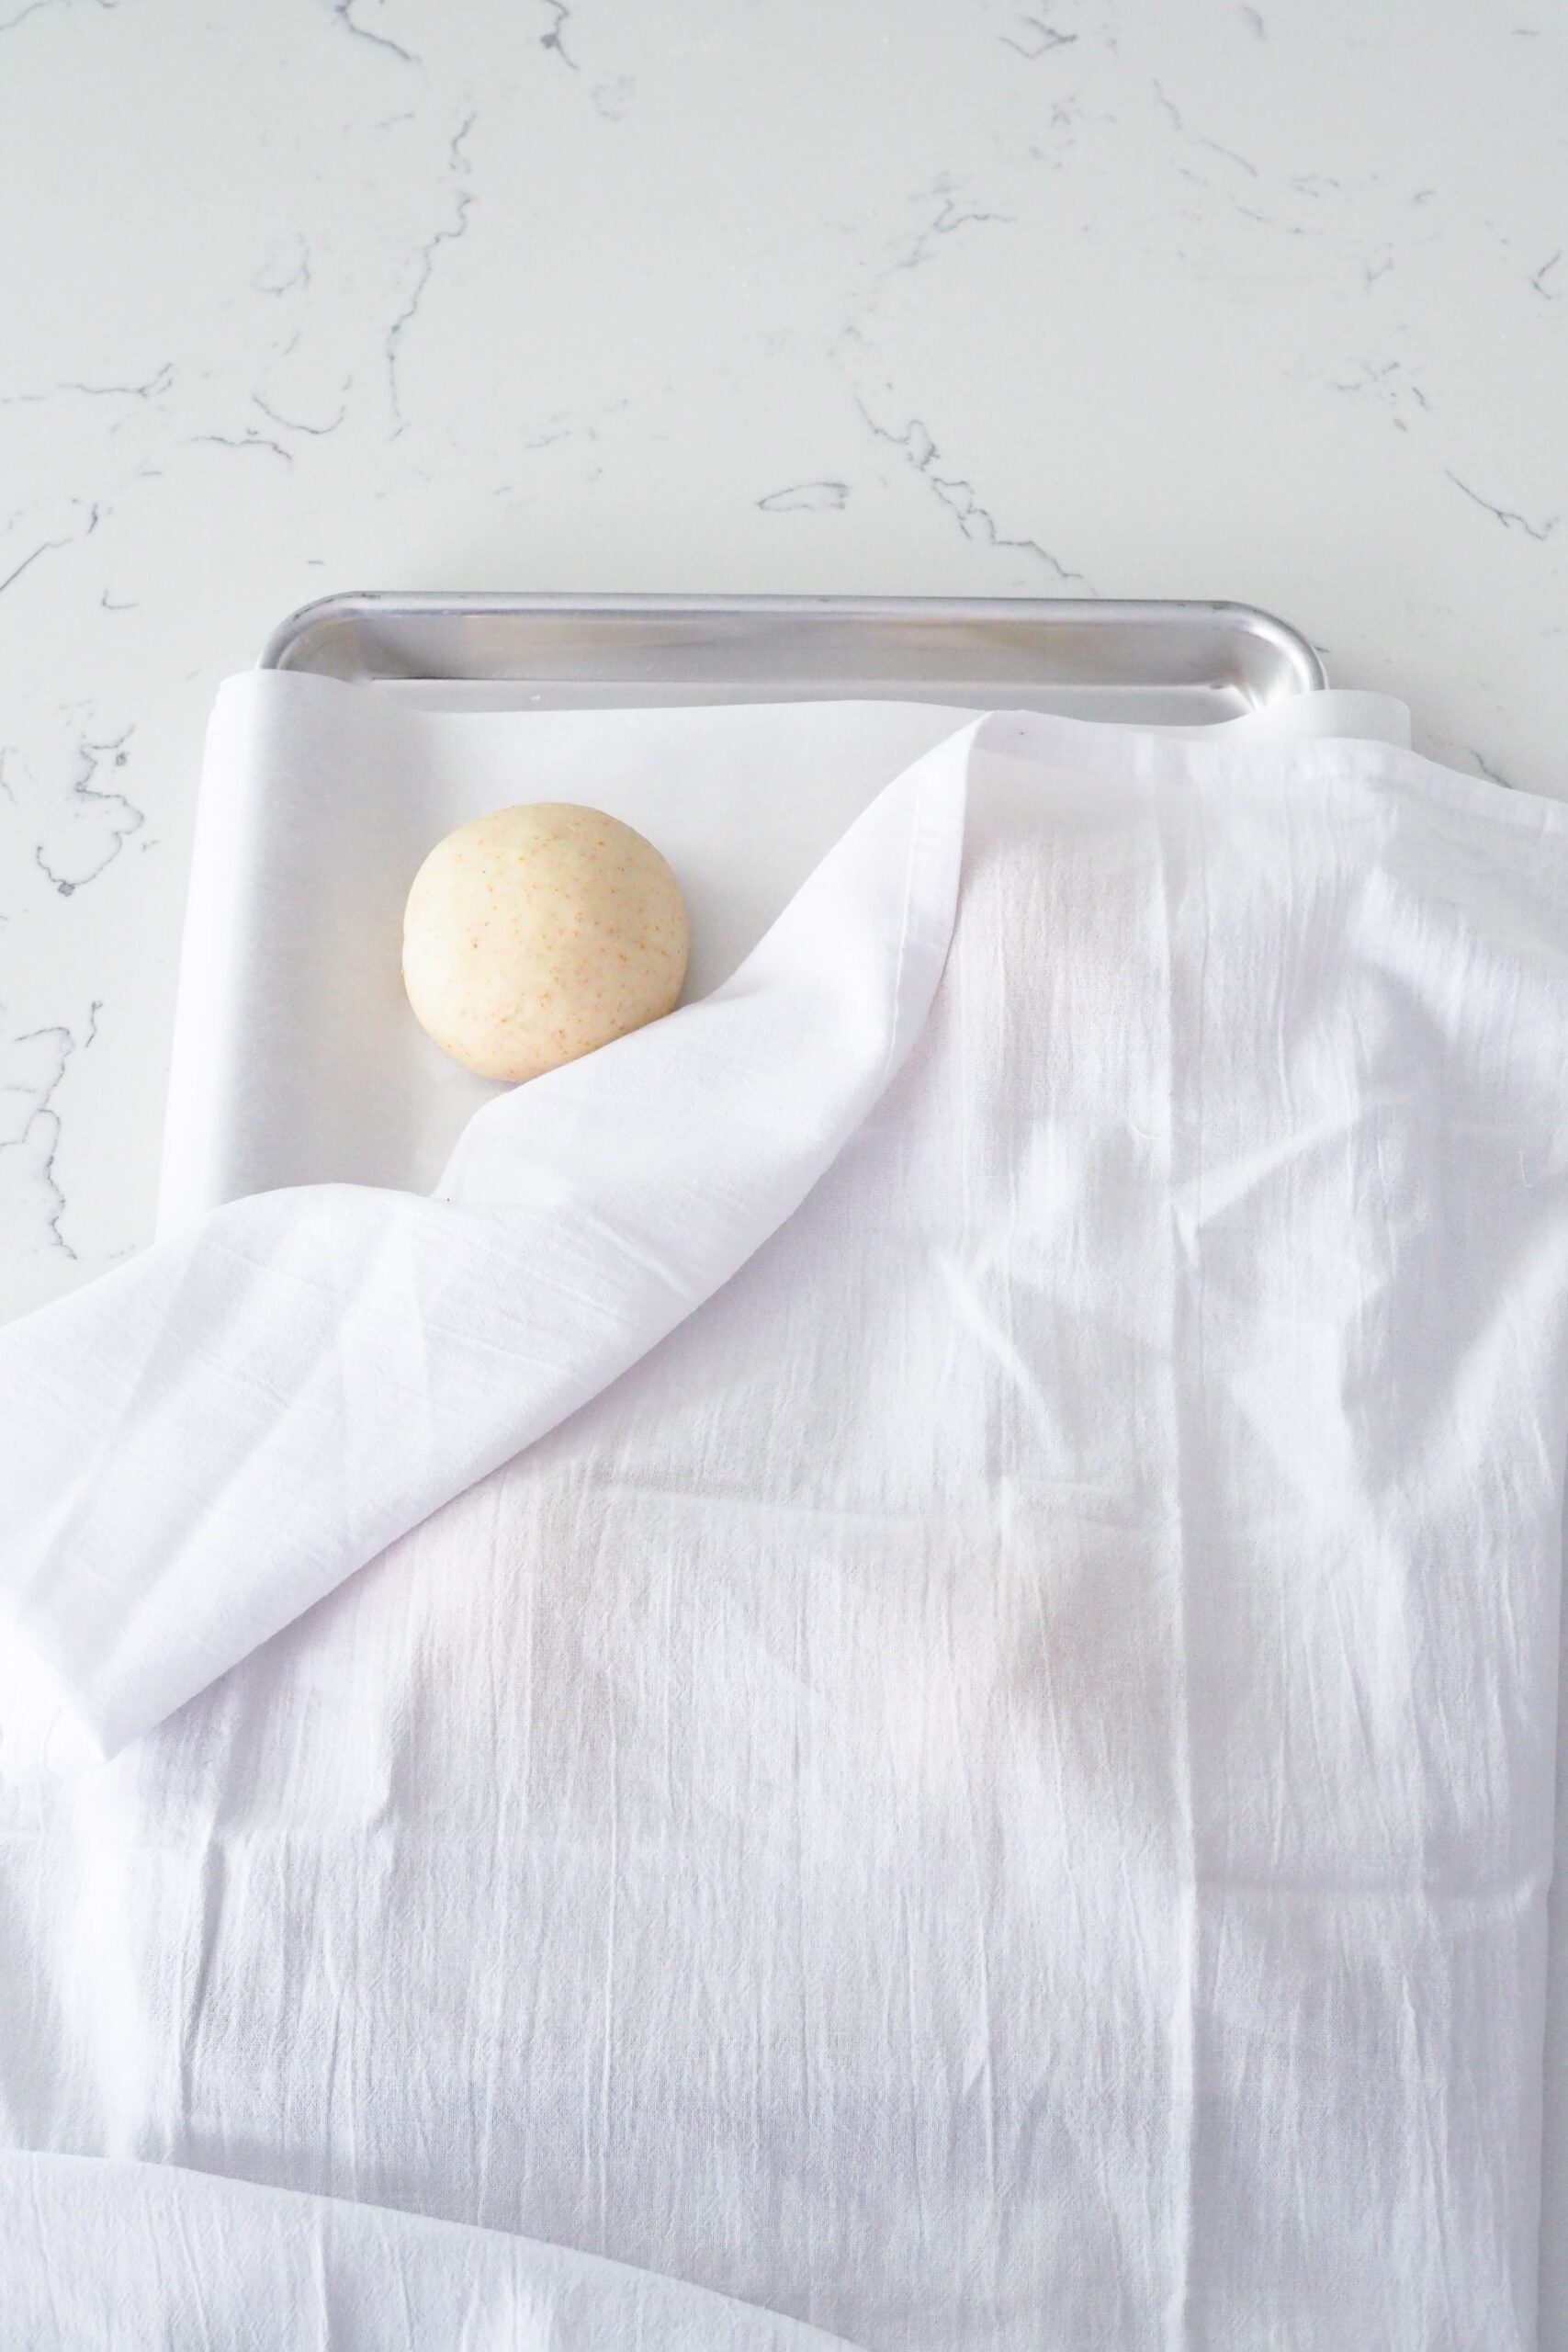 A dough ball peeks out behind a white kitchen towel on a baking sheet.